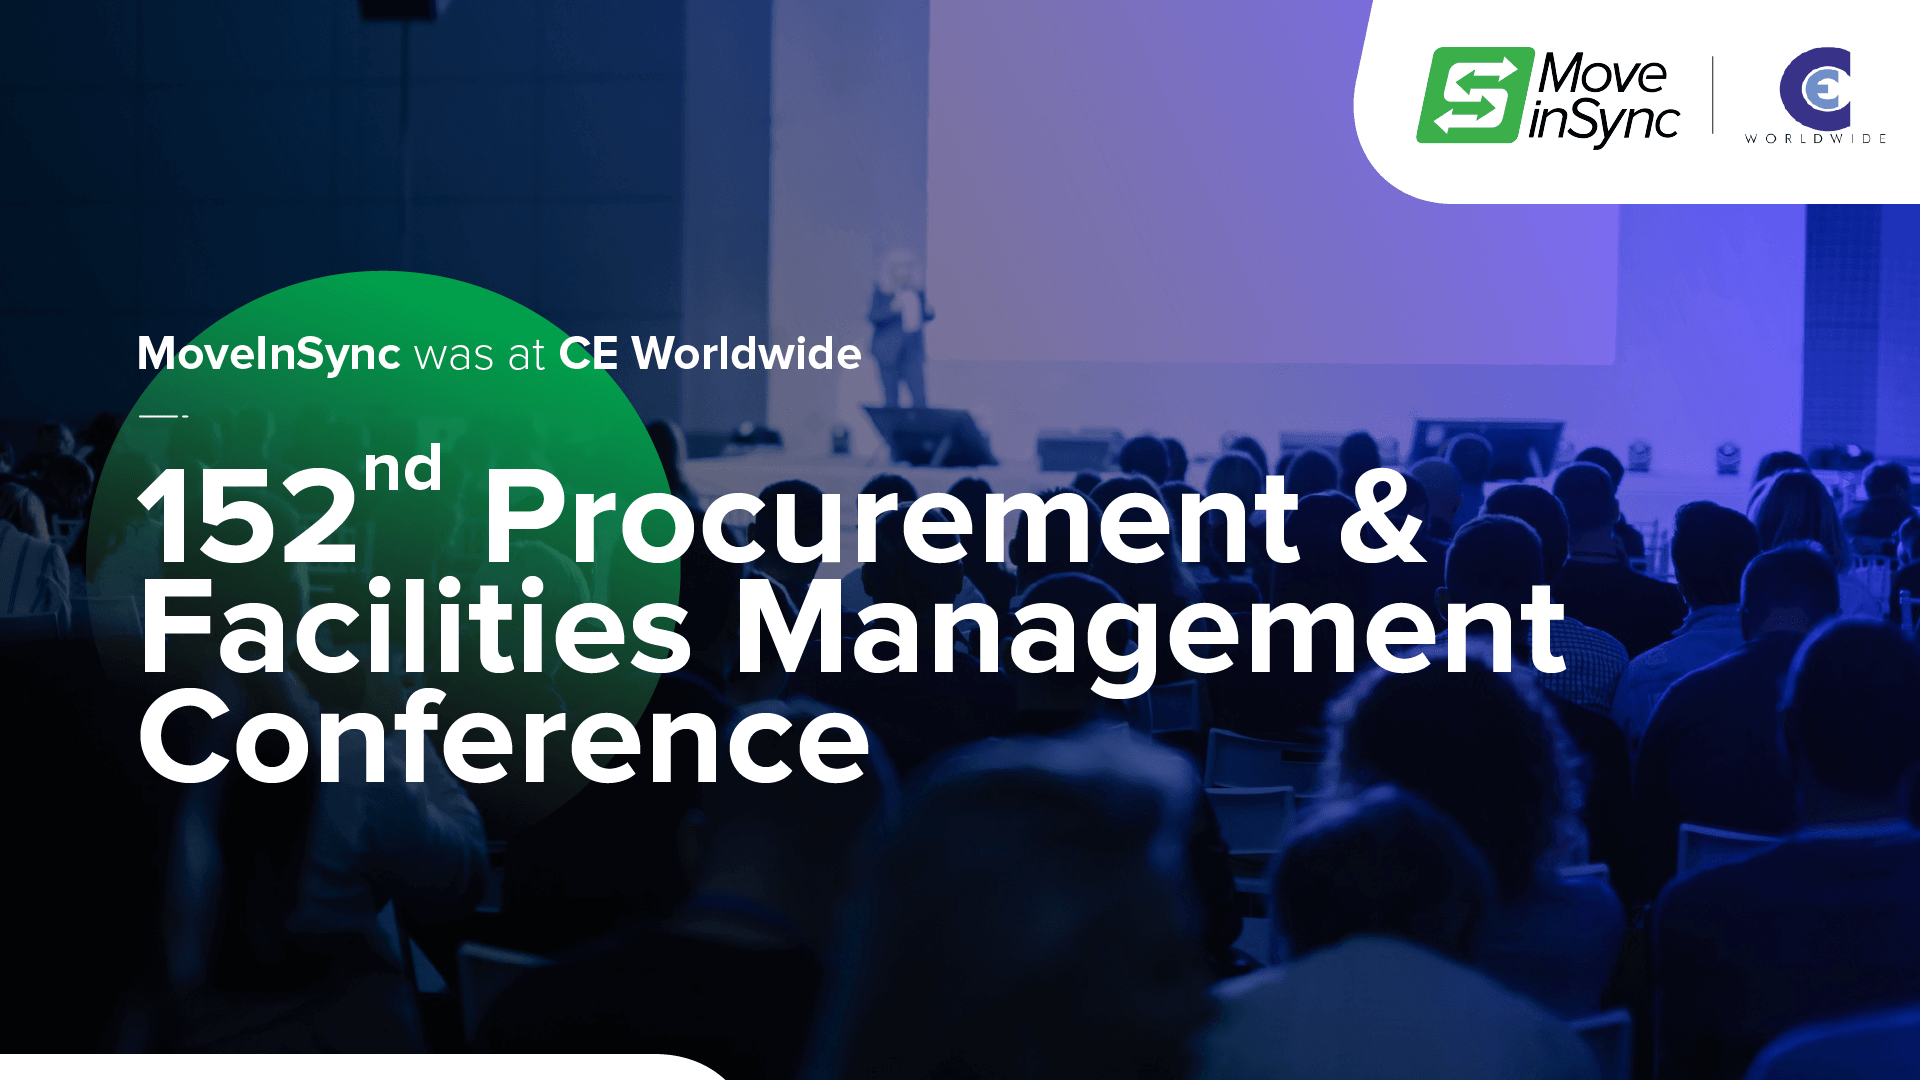 CE Worldwide 152nd Procurement & Facilities Management Conference